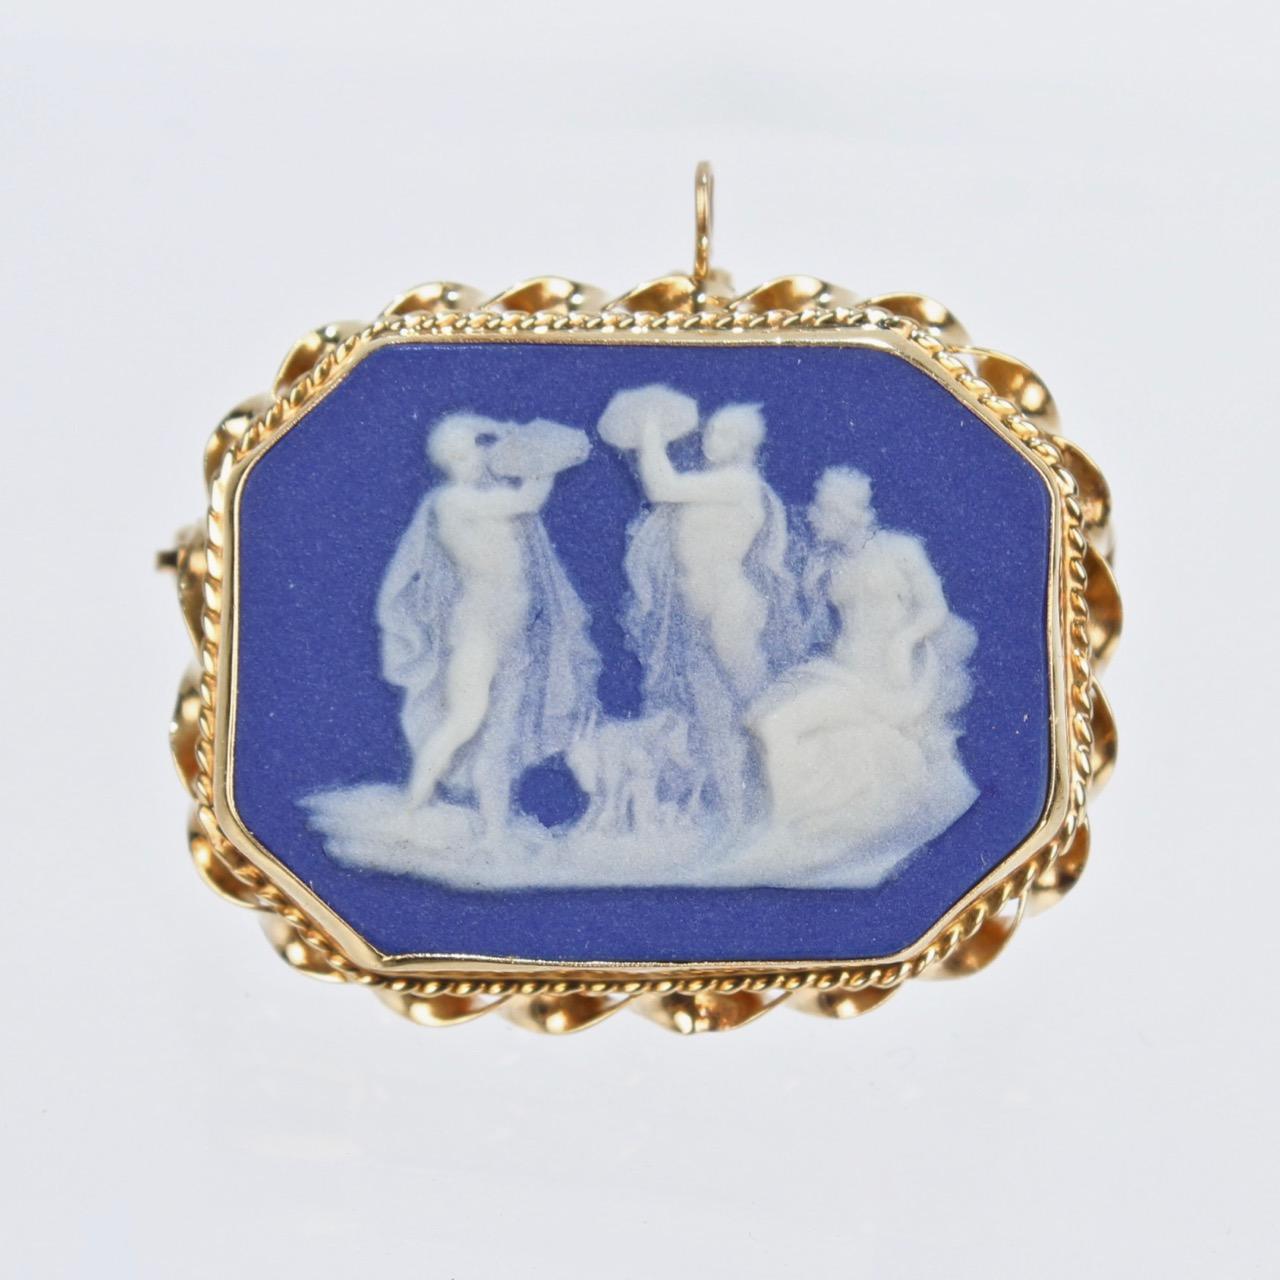 A wonderful antique Wedgwood blue jasperware and 14k gold pin and pendant combination.

The early 19th century plaque was finely bezel set in 14k gold in the early to mid 20th century by a clearly capable jeweler. 

It can be worn both as a brooch